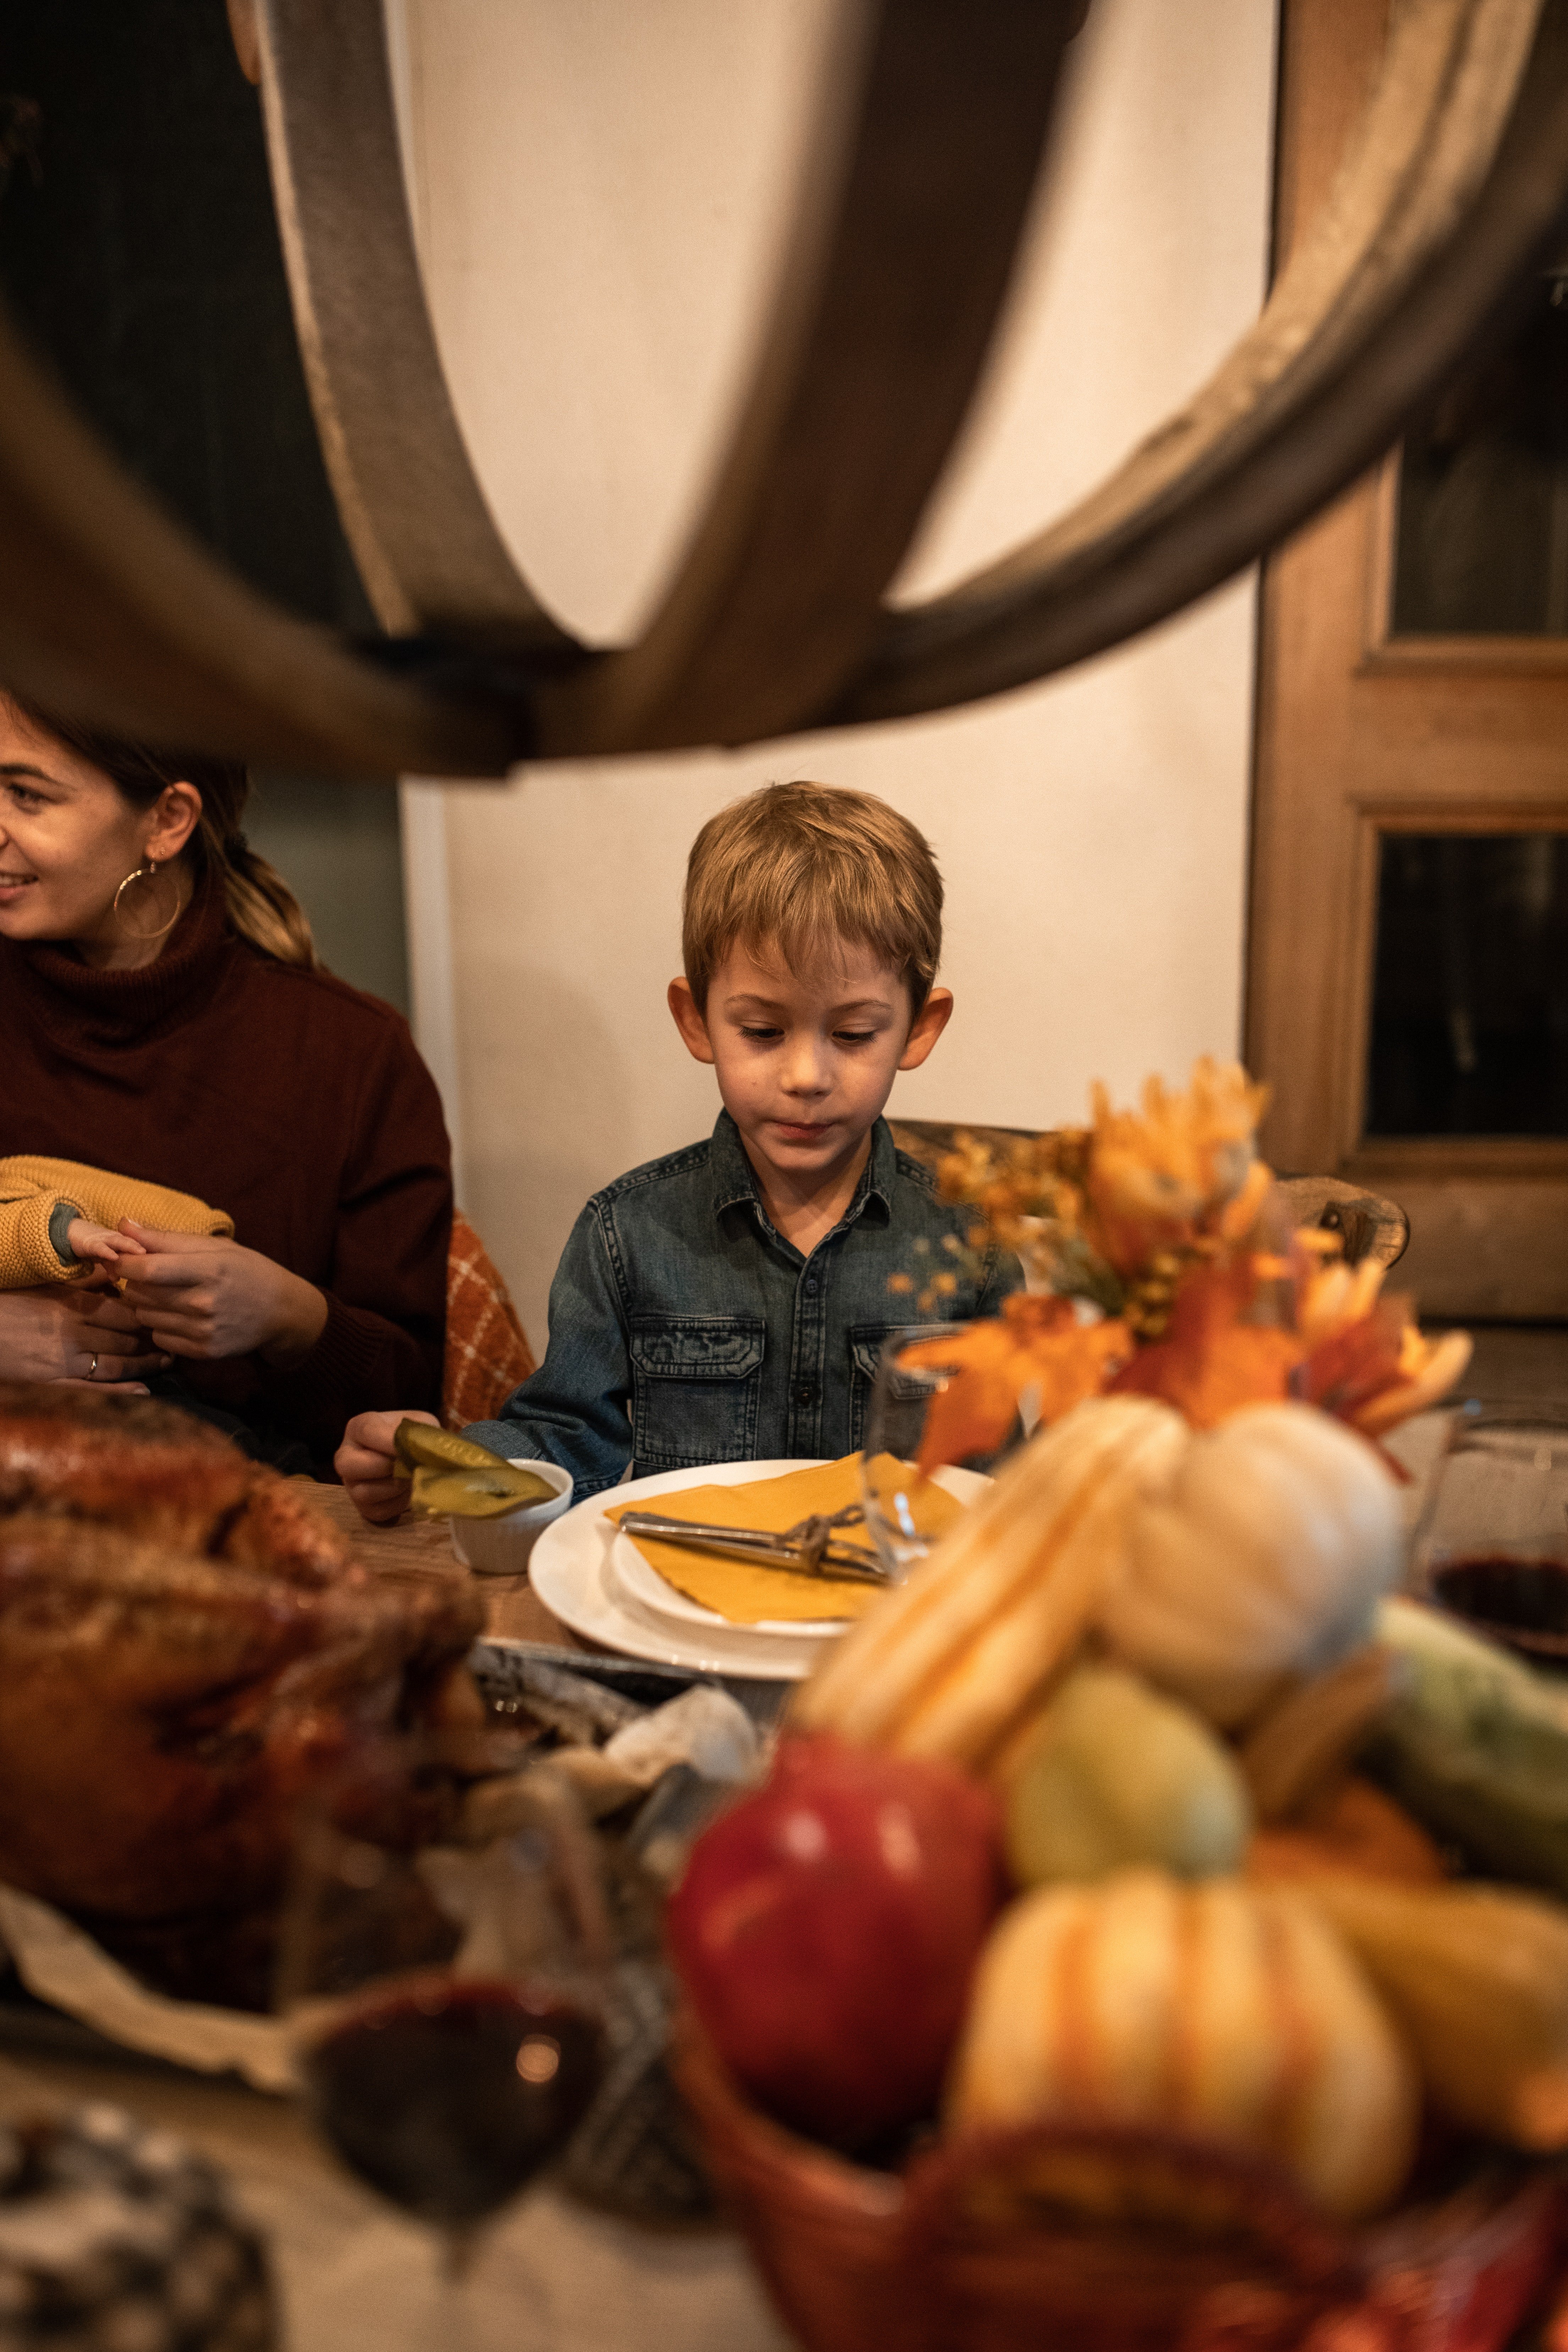 On Friday, we dined with my father, and Mickey asked him interesting questions. | Photo: Pexels